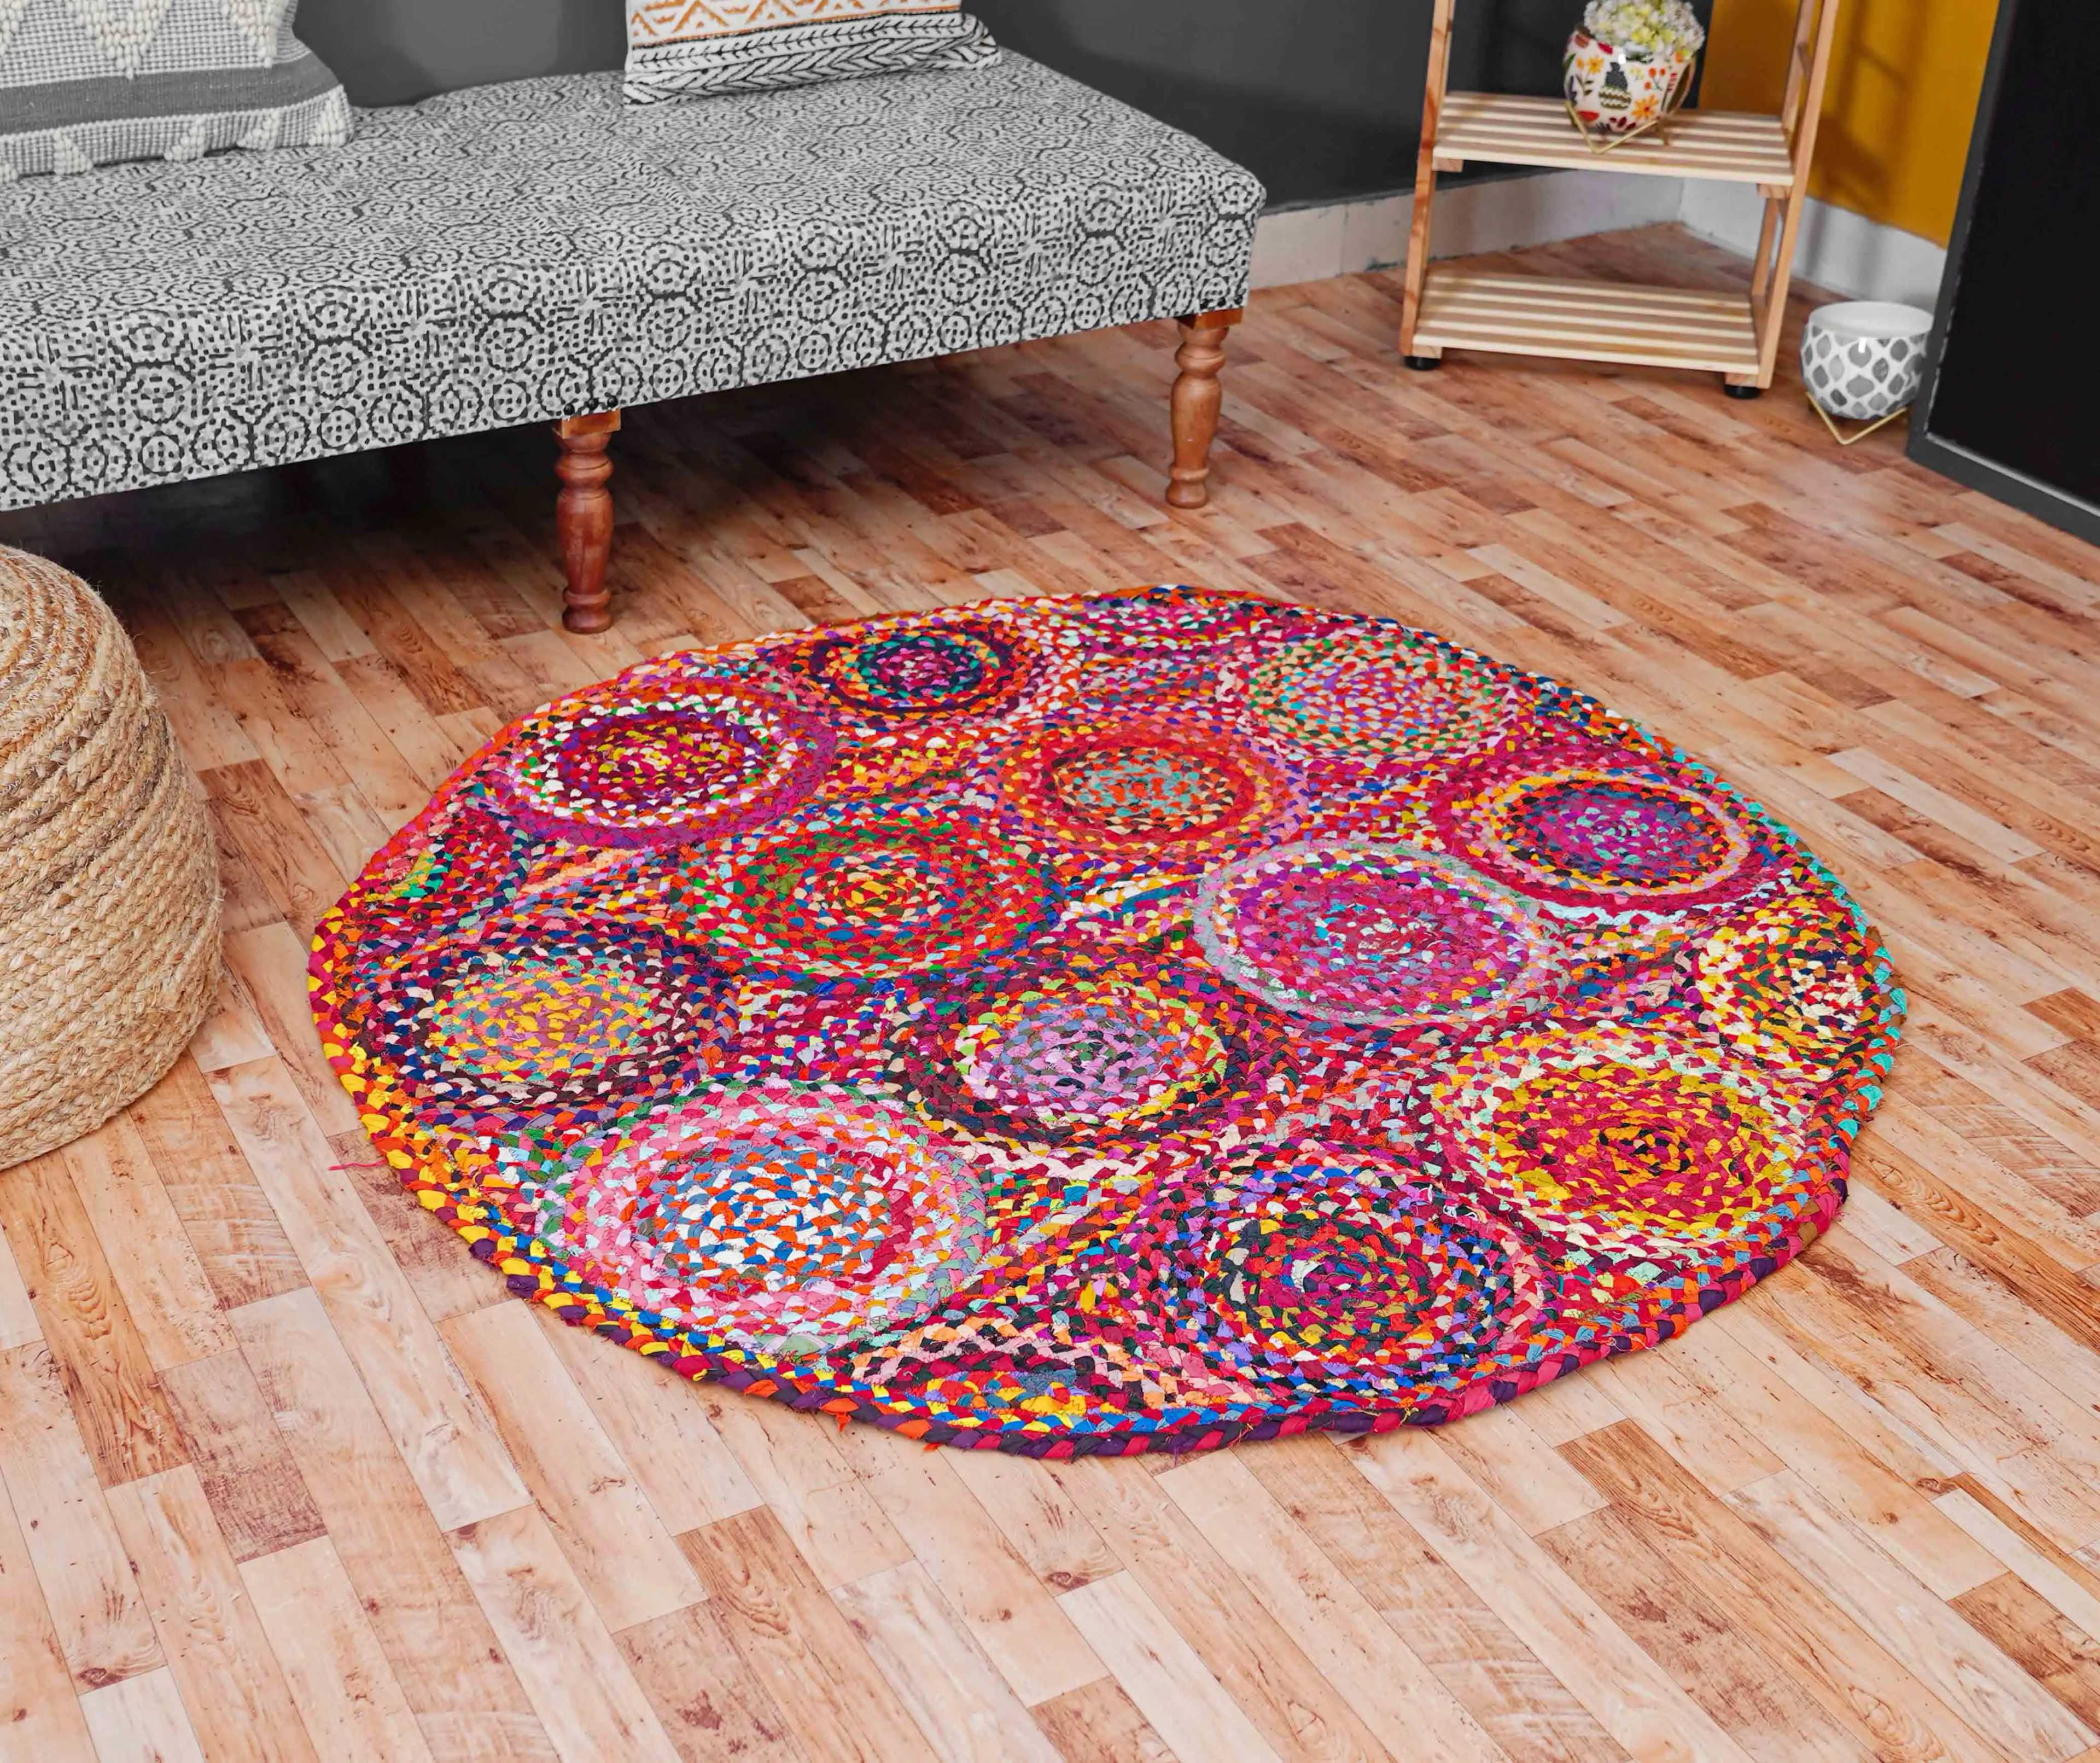 Bohemian Colorful Cotton Area Rugs Hand Braided Round Rugs Multi Color Home  Decor Rugs Bohemian Rug Floor Rug Room Decor New Design Rugs Art -   Canada